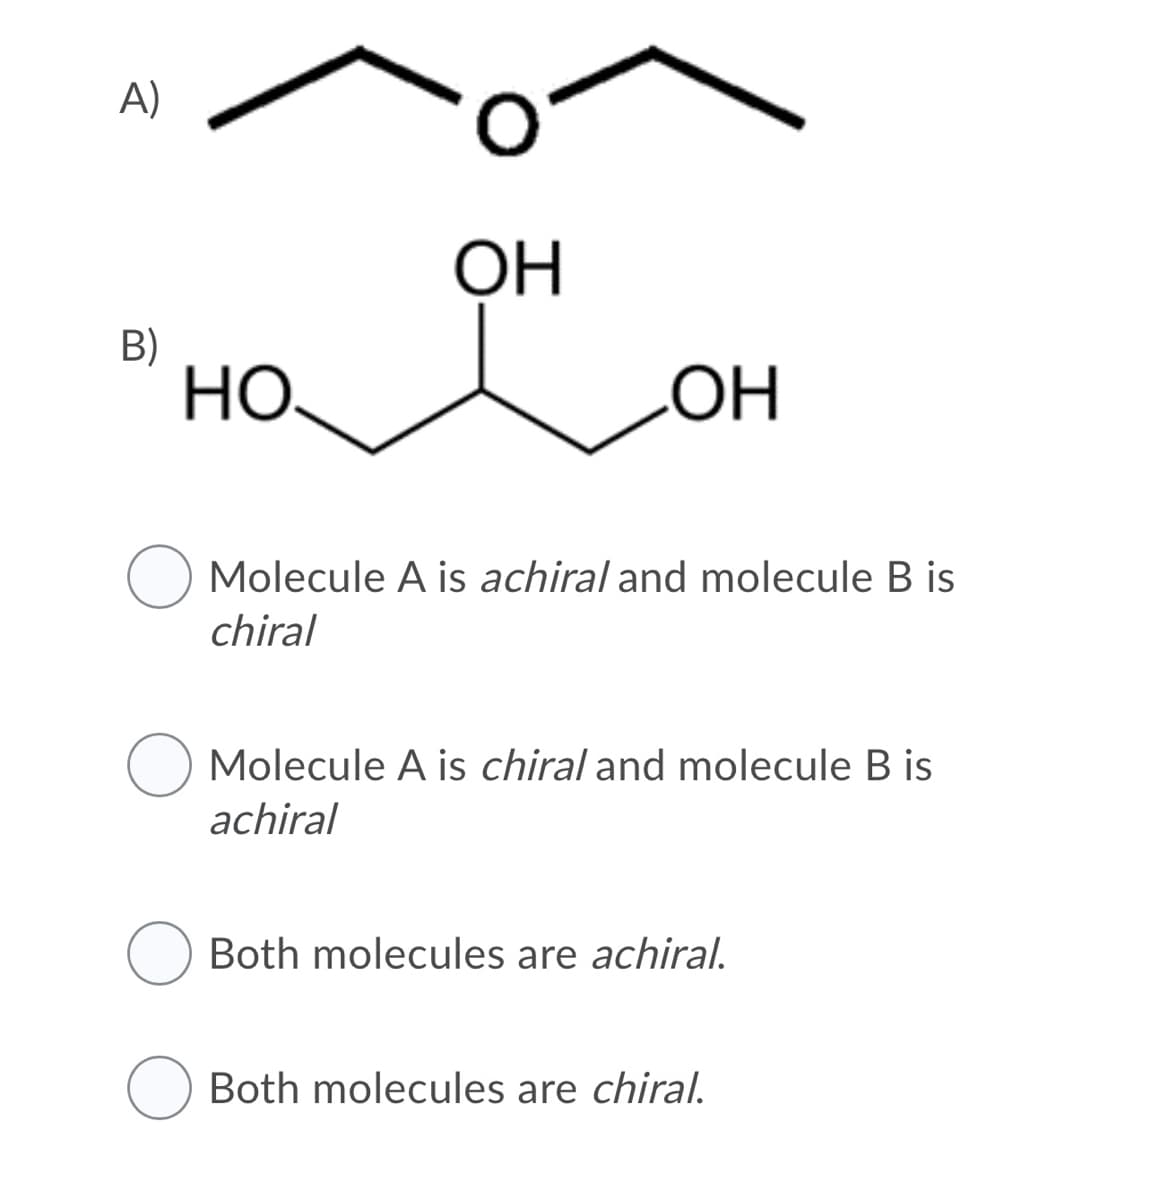 A)
ОН
B)
HO.
Molecule A is achiral and molecule B is
chiral
Molecule A is chiral and molecule B is
achiral
Both molecules are achiral.
Both molecules are chiral.
